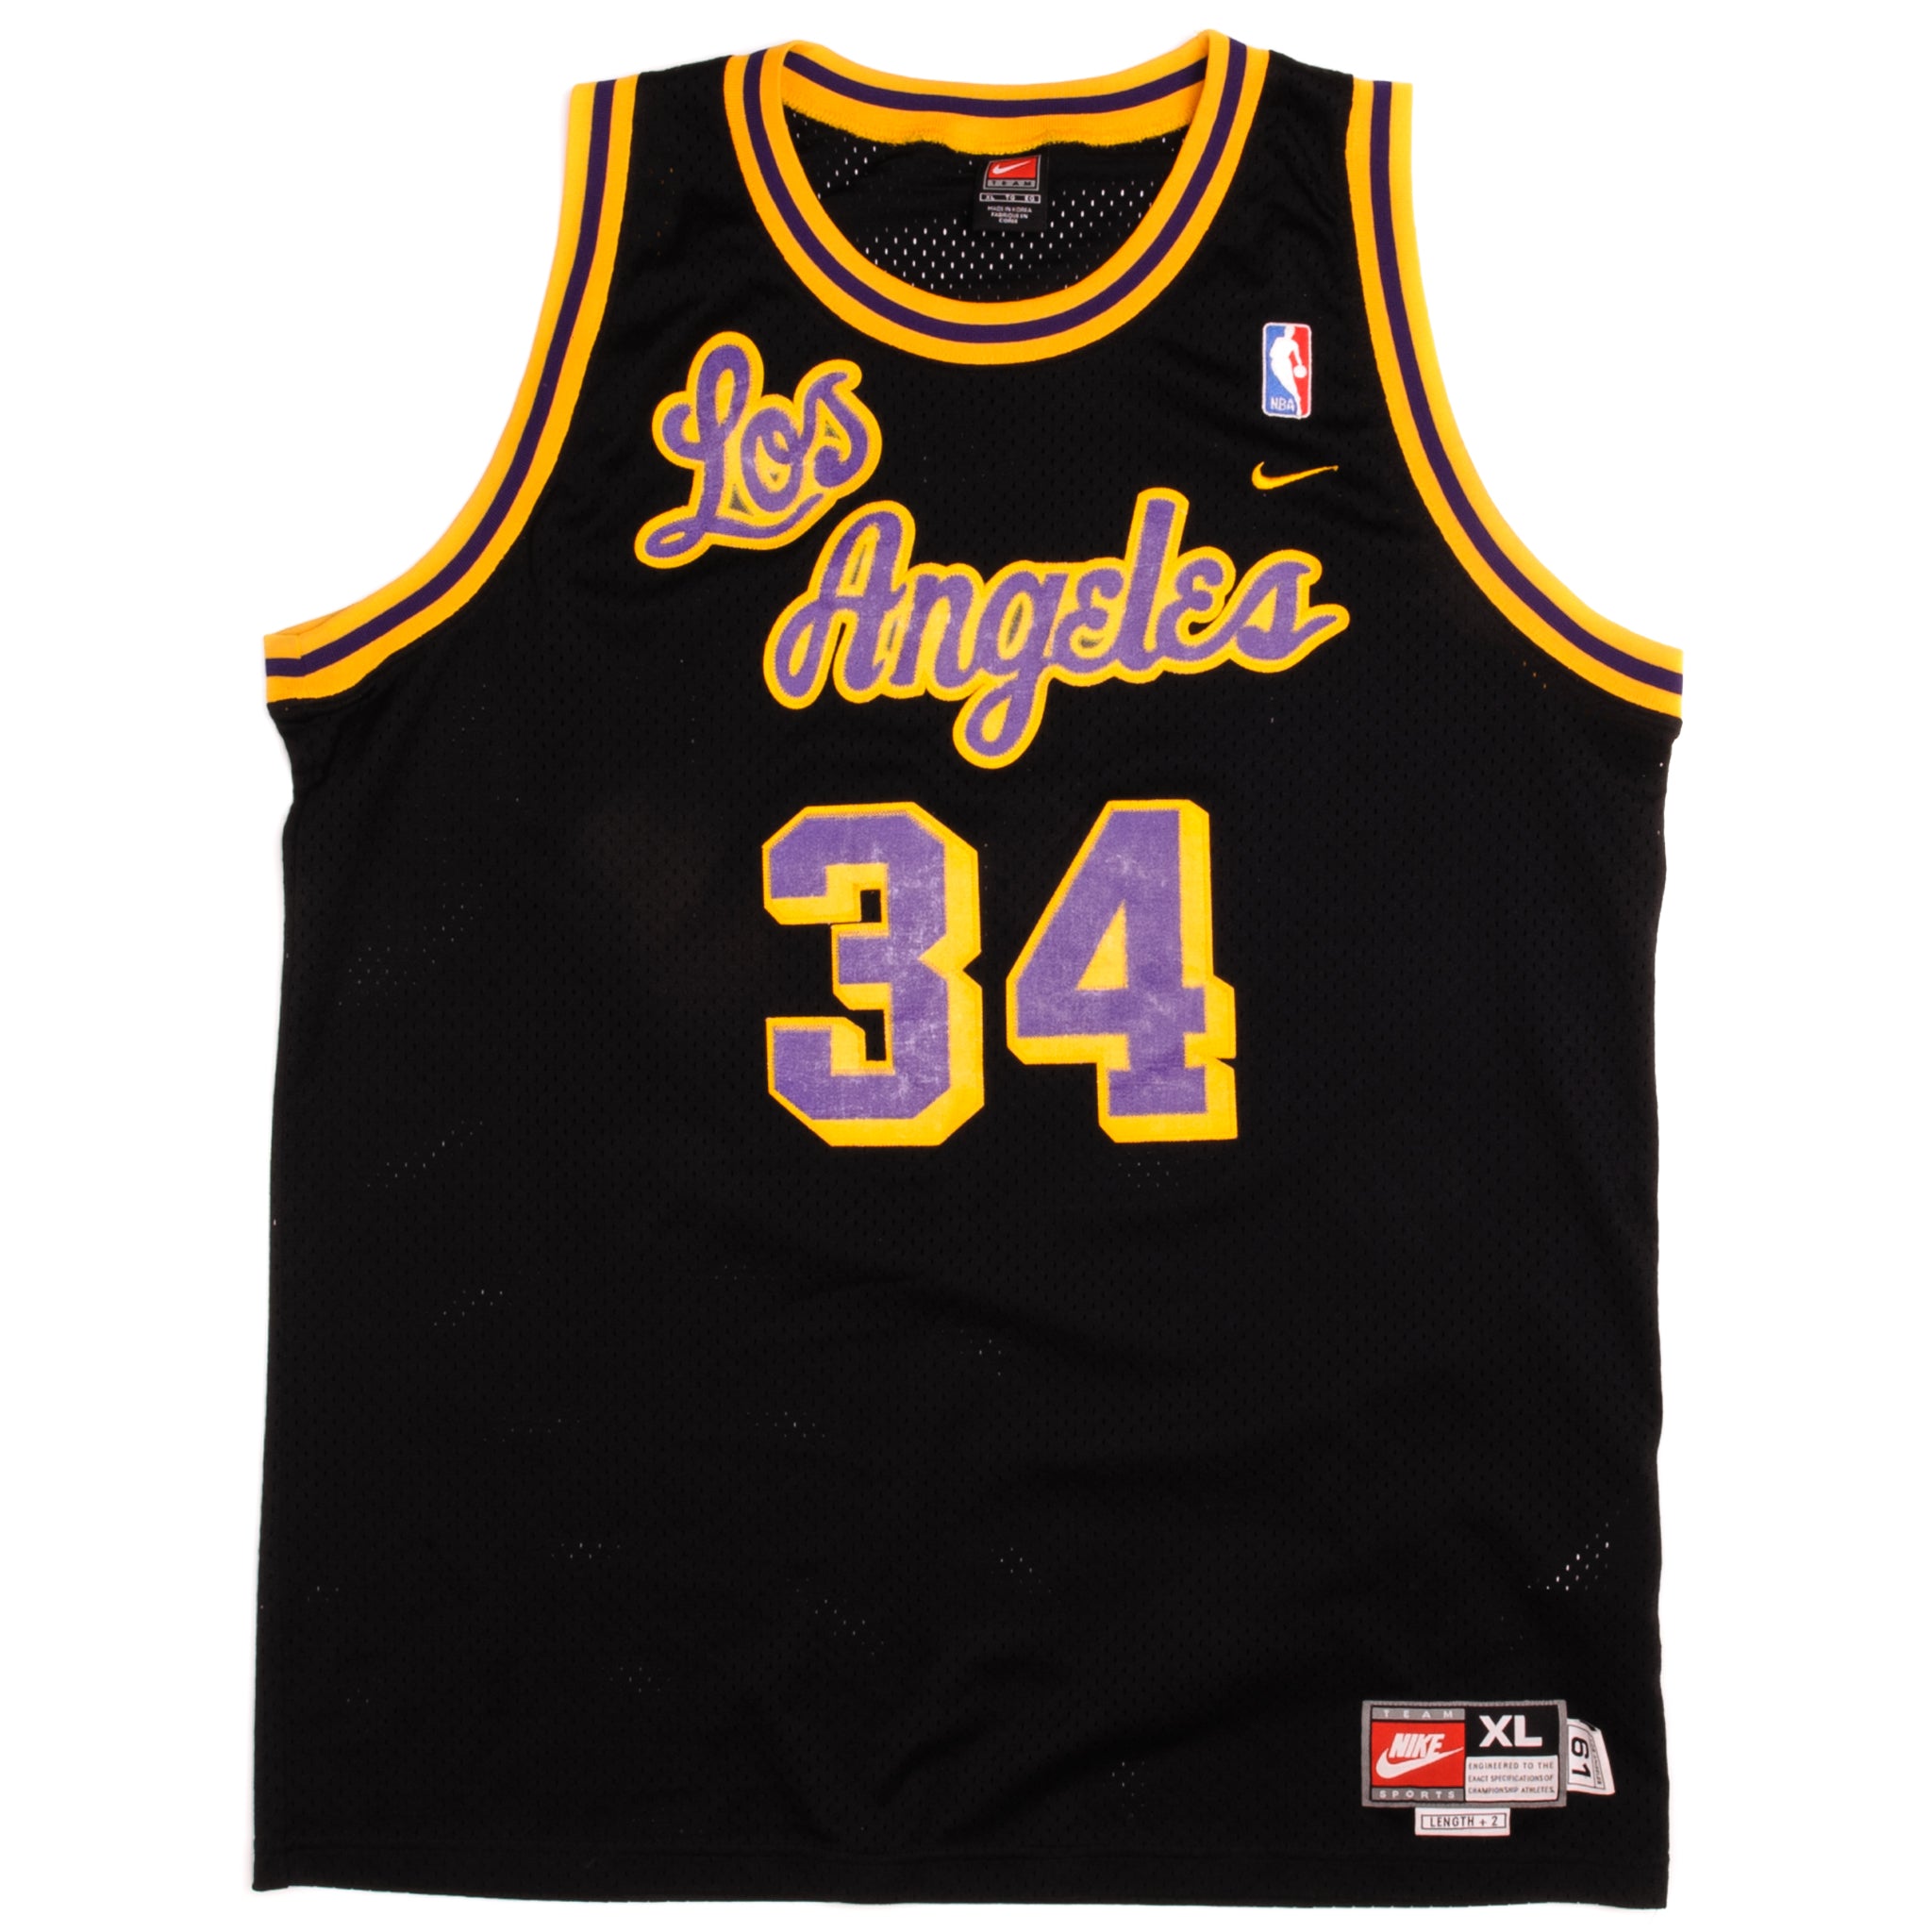 Vintage Shaquille O'neal LA Lakers Jersey NWT Shaq Los Angeles 90's NBA  basketball – For All To Envy